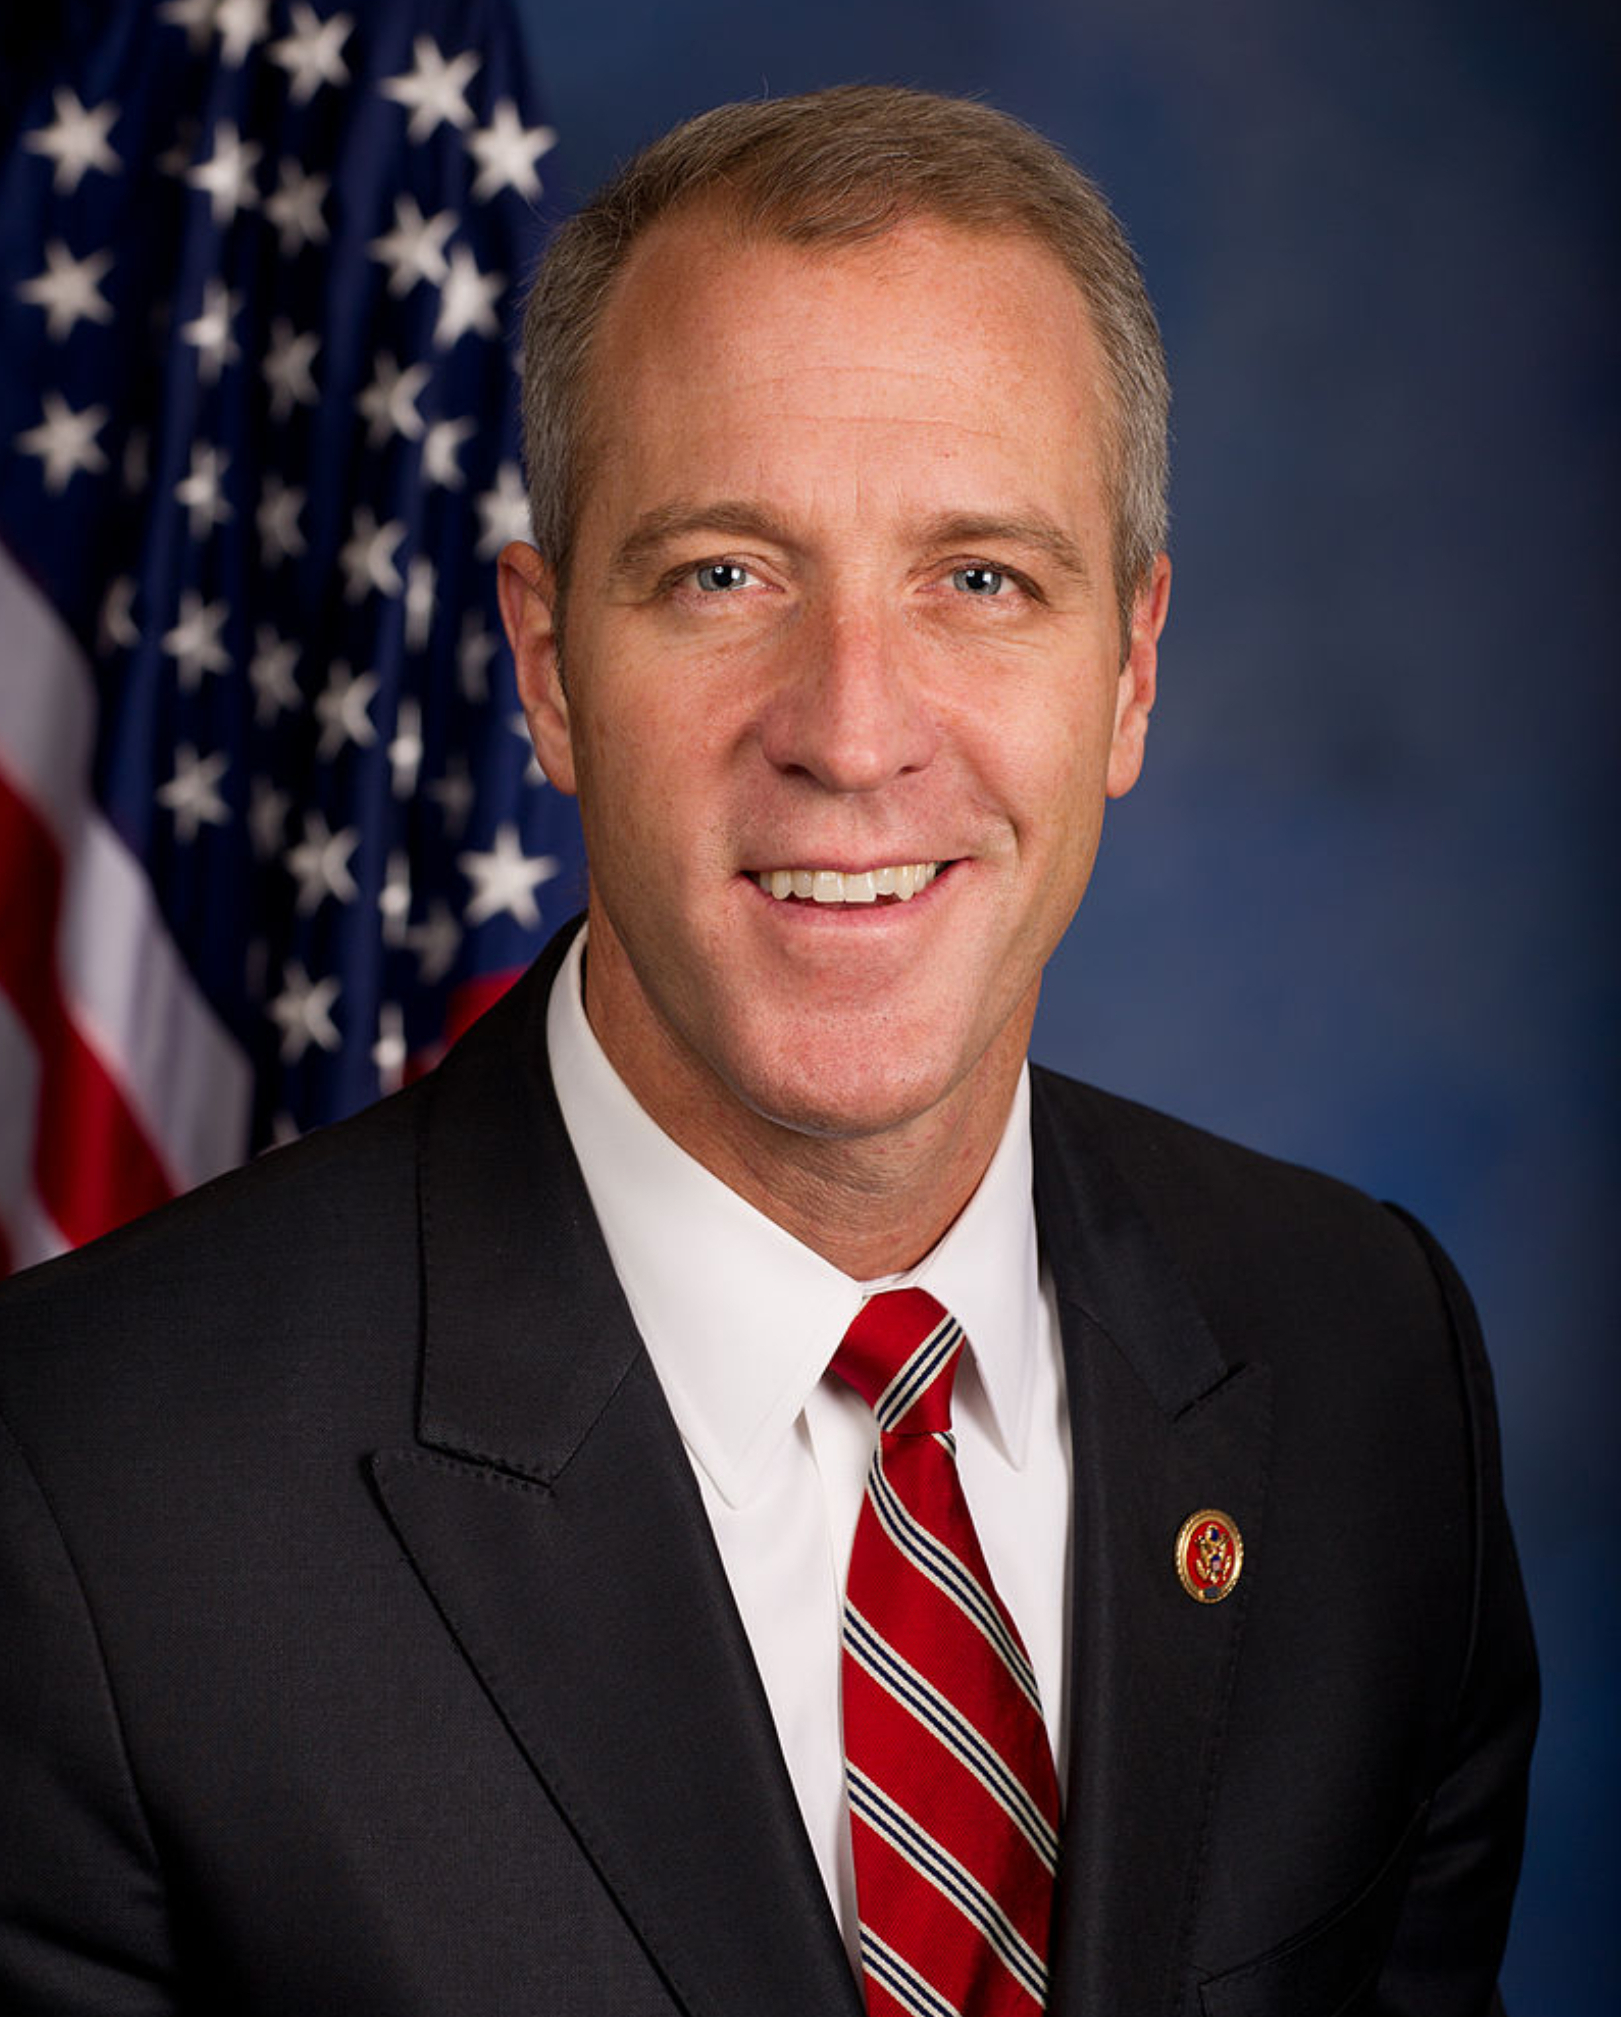 Press Release: The Revolving Door Project Calls On Senate To Delay Confirmation Of Sean Patrick Maloney Until Crypto Ties Can Be Investigated